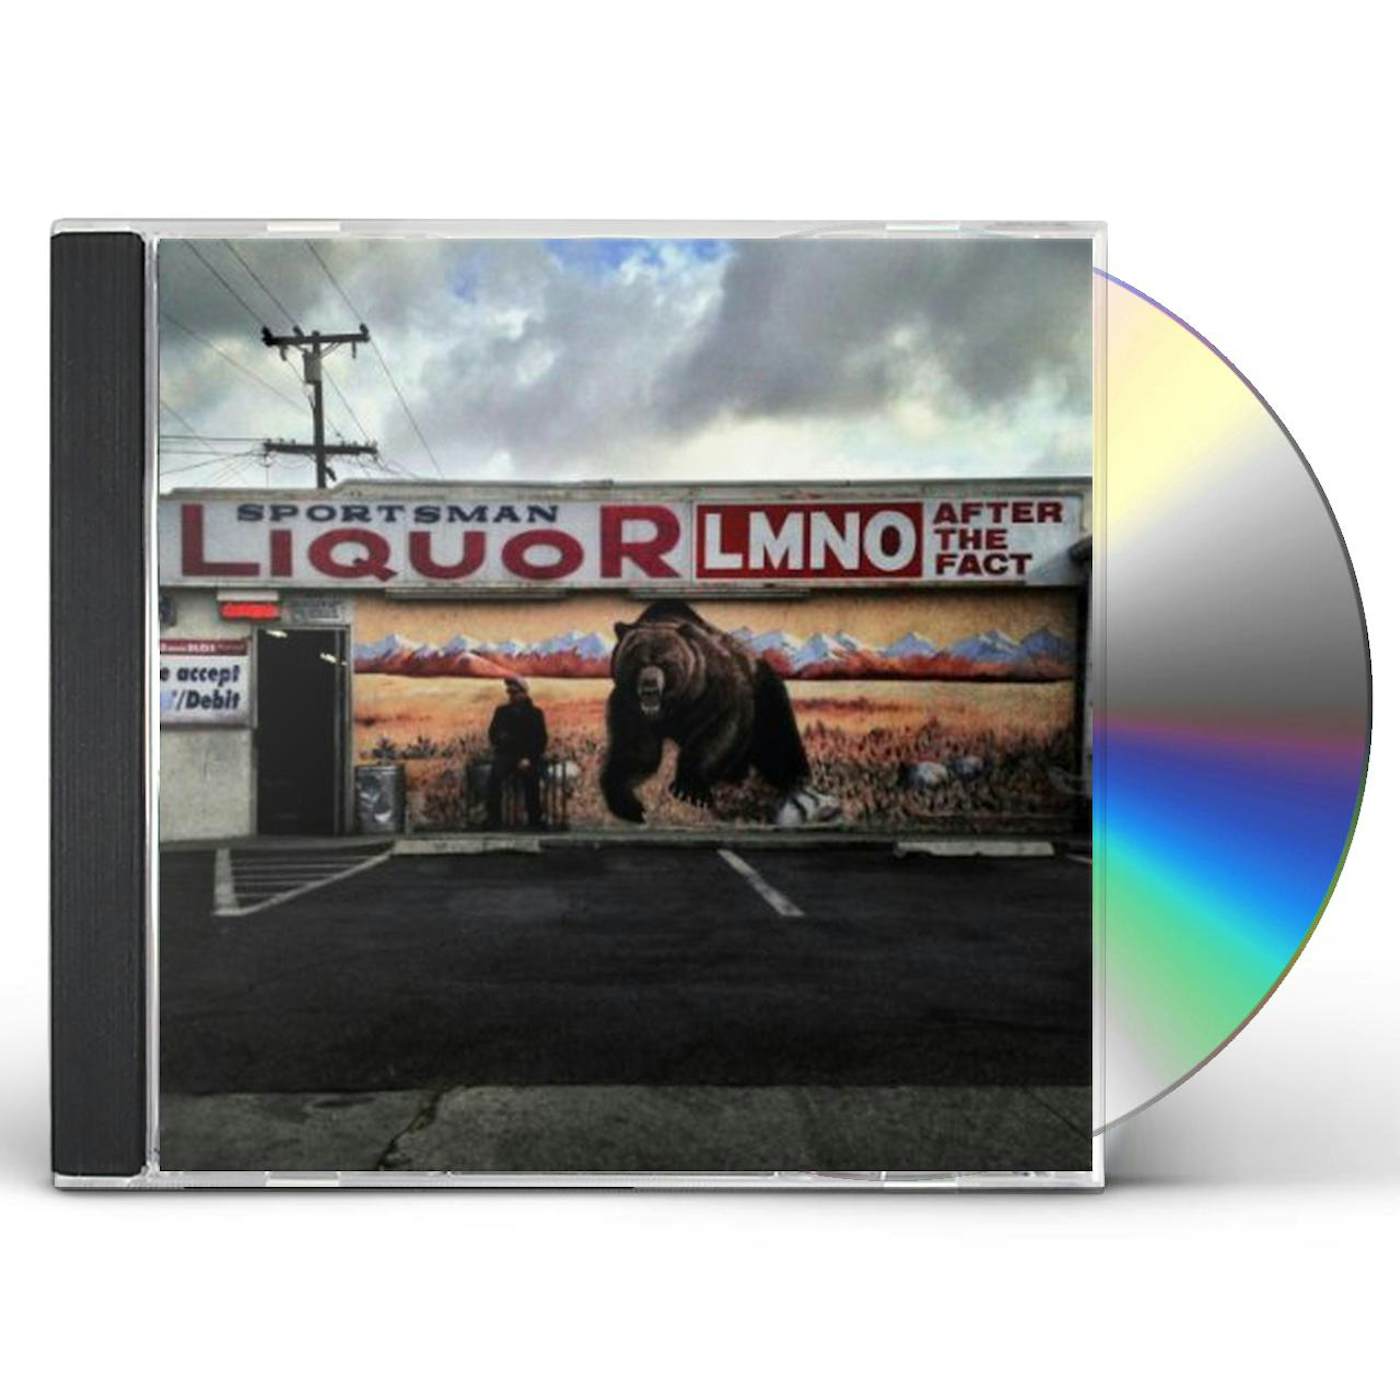 LMNO AFTER THE FACT CD